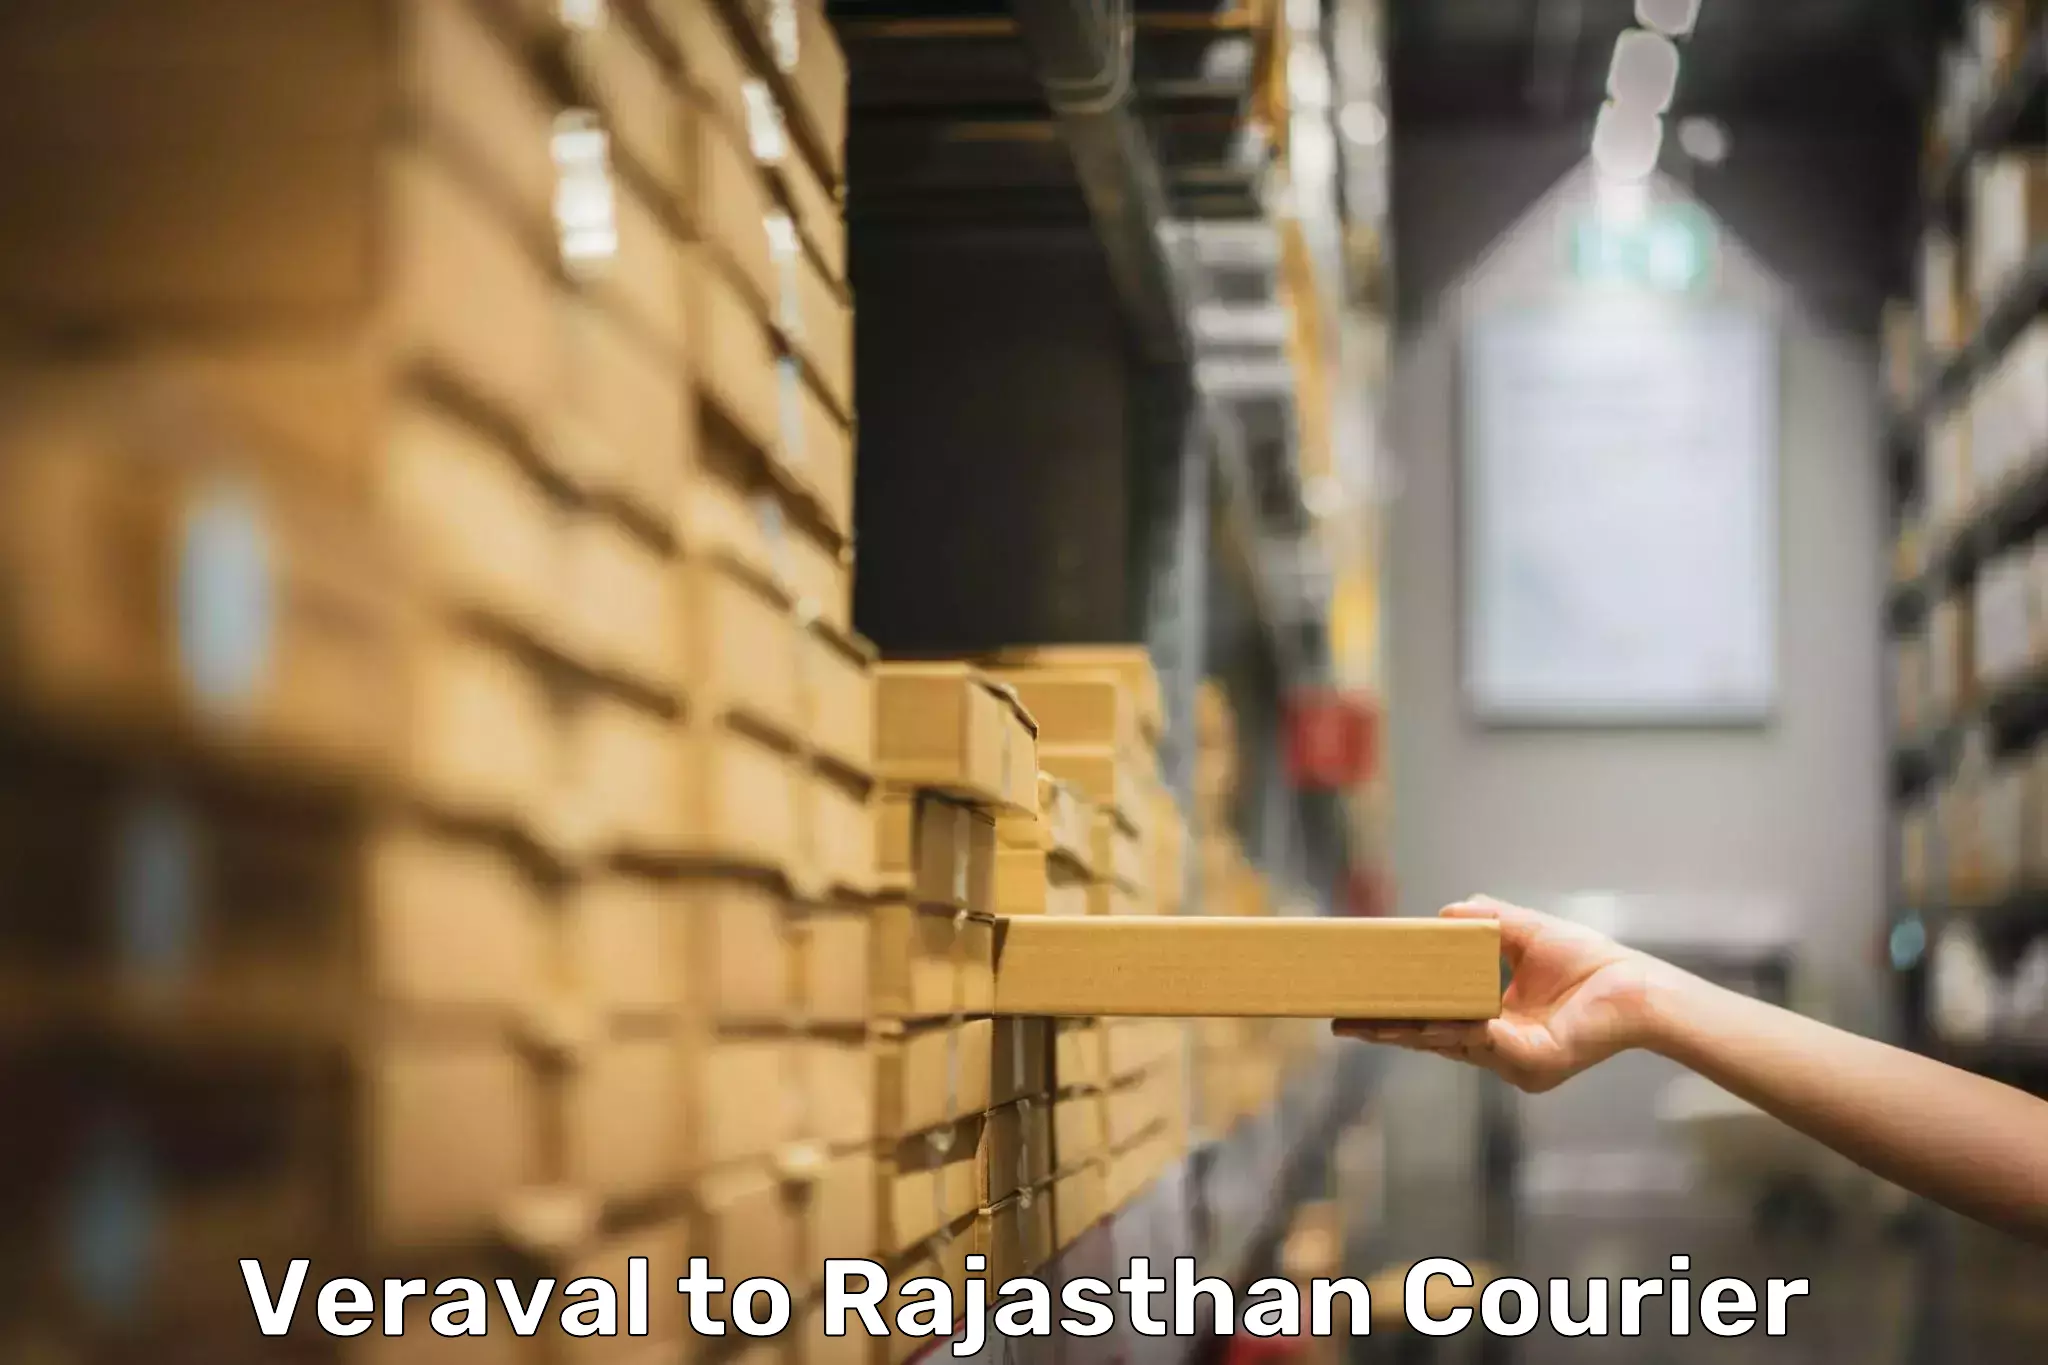 Luggage transport consultancy Veraval to Rajasthan